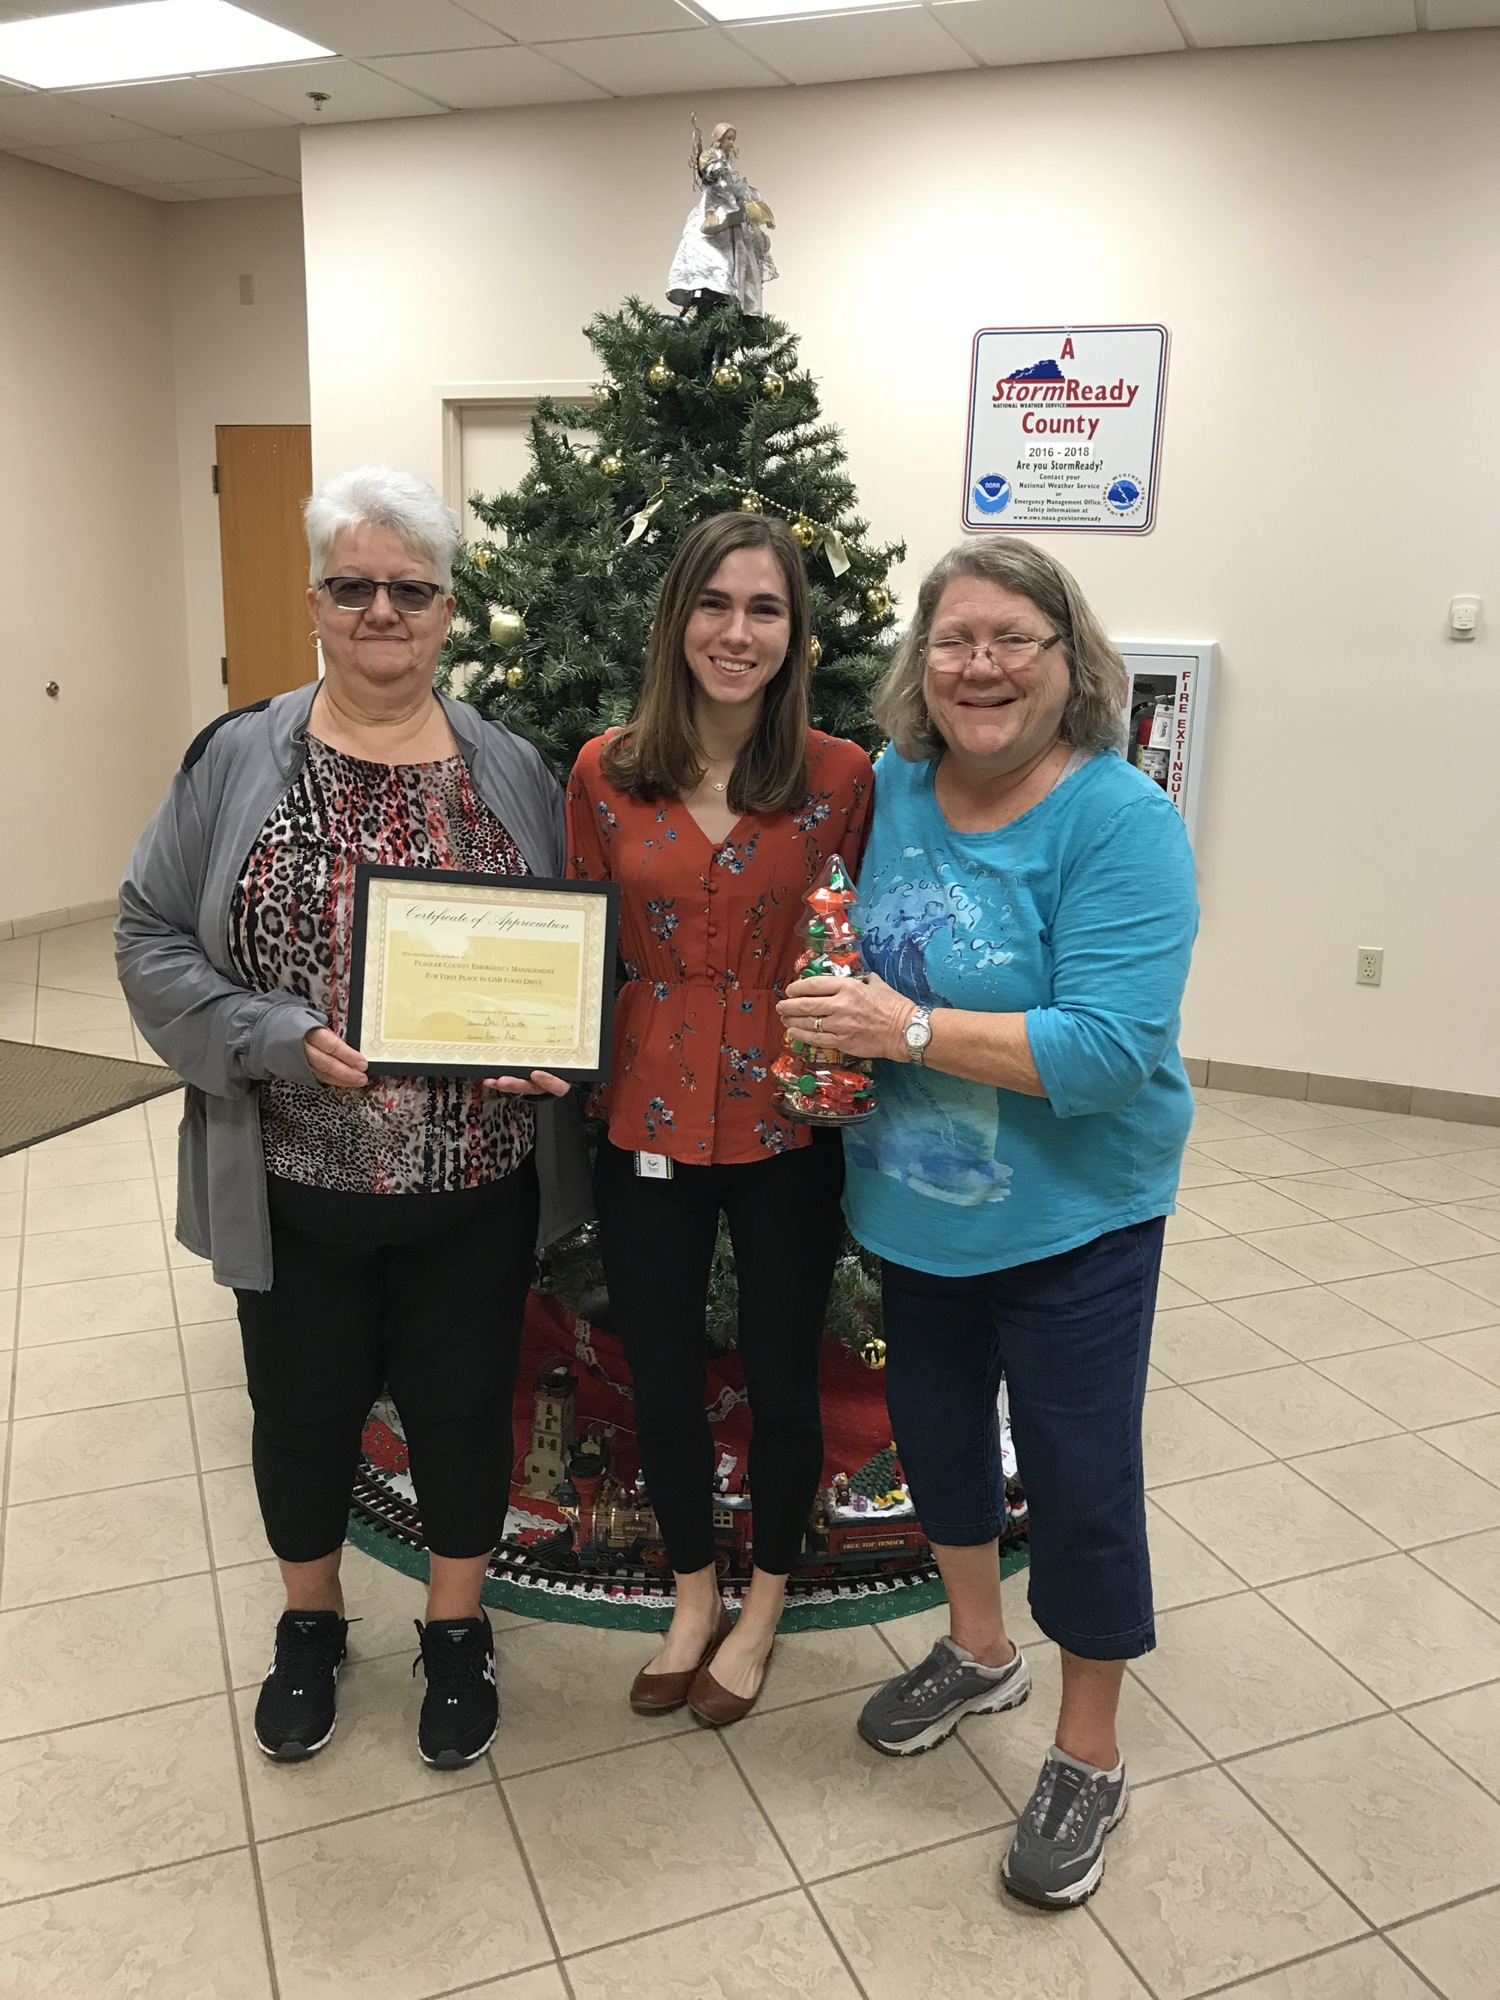 Dottie Colletta, chairwoman of Feed Flagler, Lea Tardanico, Emergency Management planner and Diane Dieter, assistant chairwoman of Feed Flagler. Courtesy of Feed Flagler